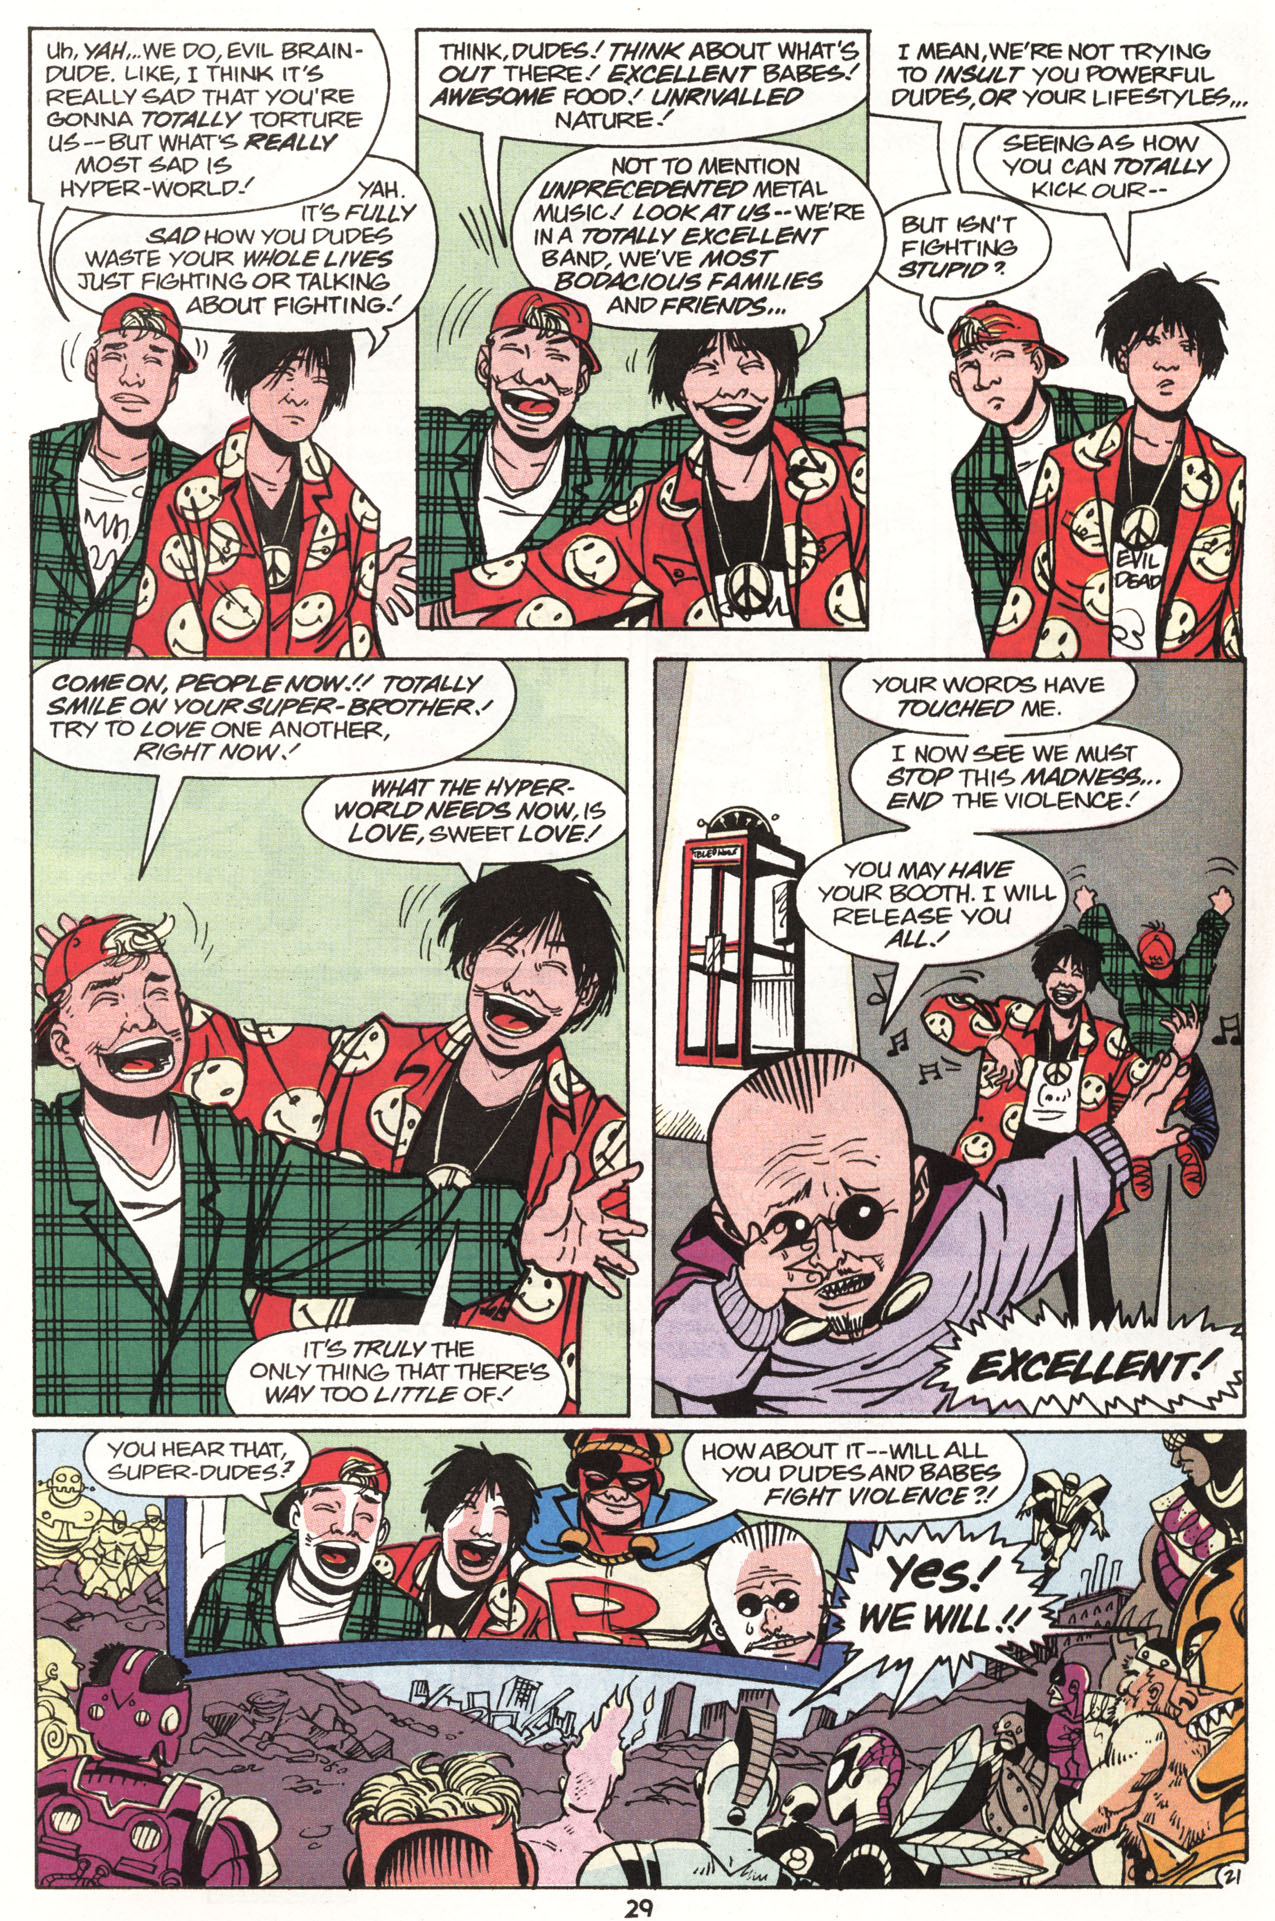 Read online Bill & Ted's Excellent Comic Book comic -  Issue #10 - 29